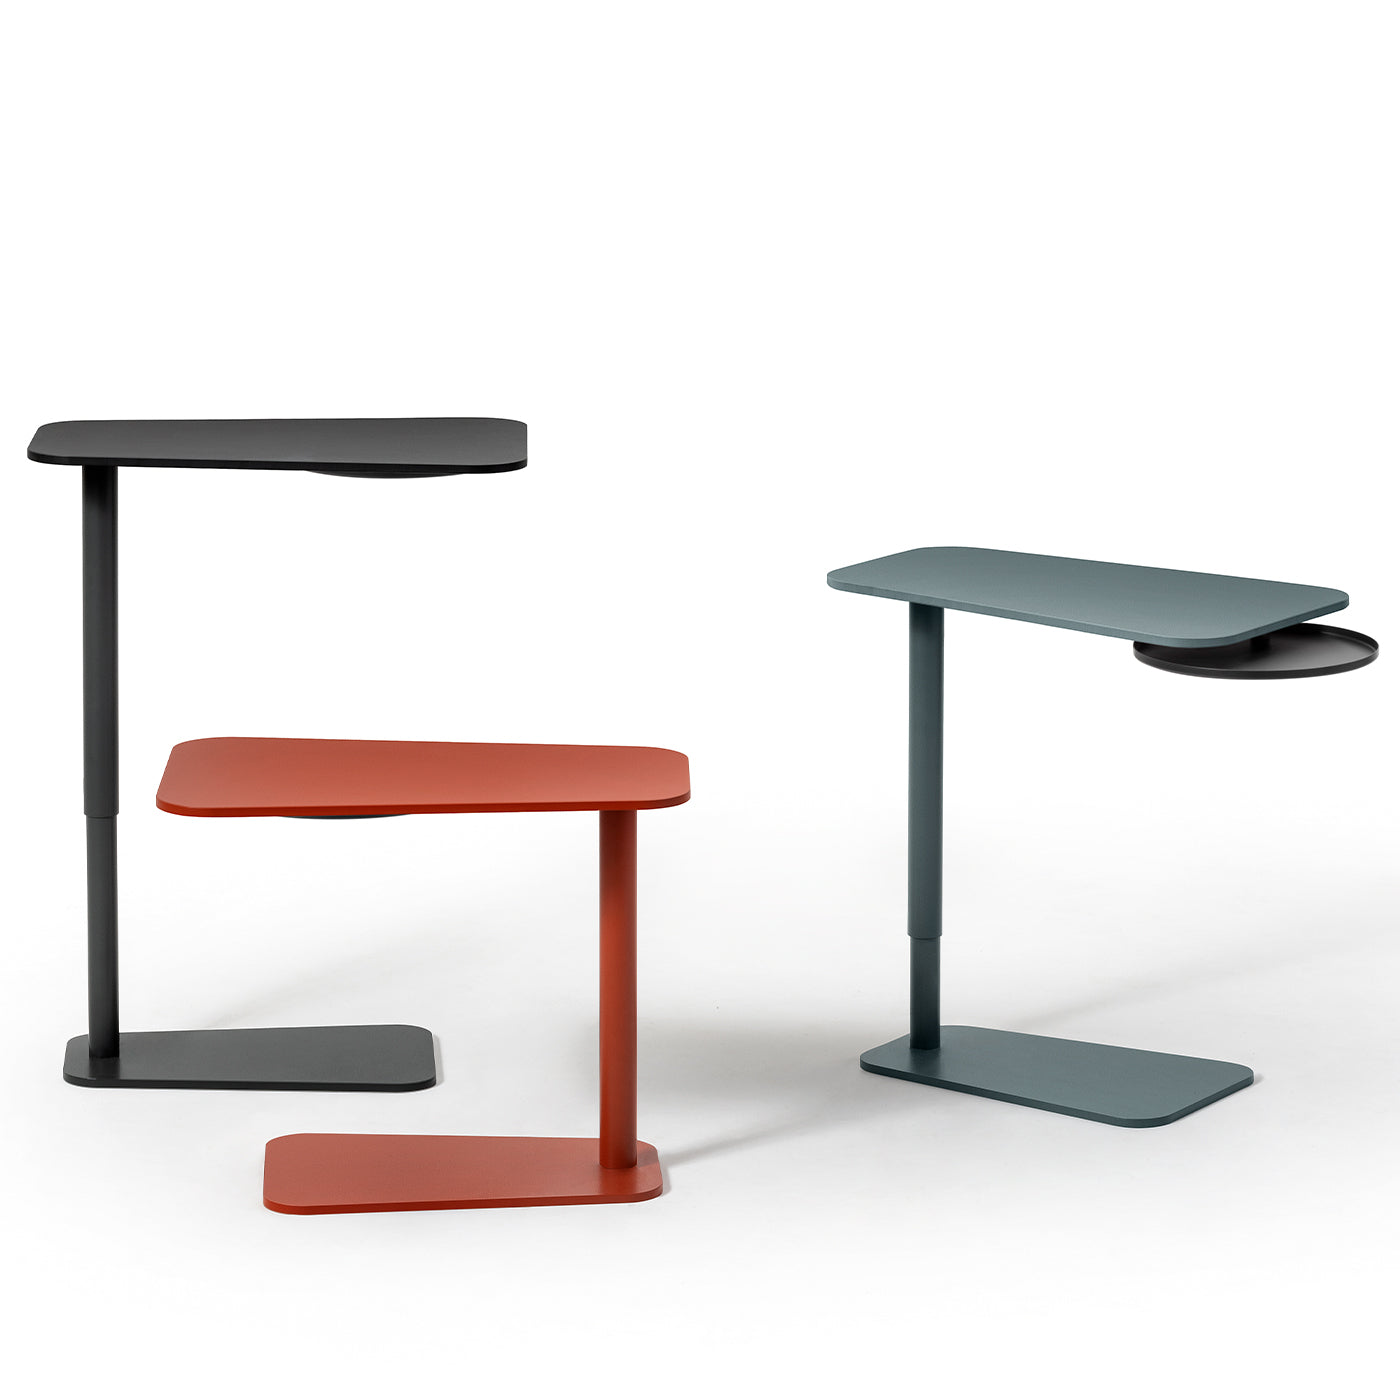 0130 Jens Red Side Table by Massimo Broglio - Alternative view 4